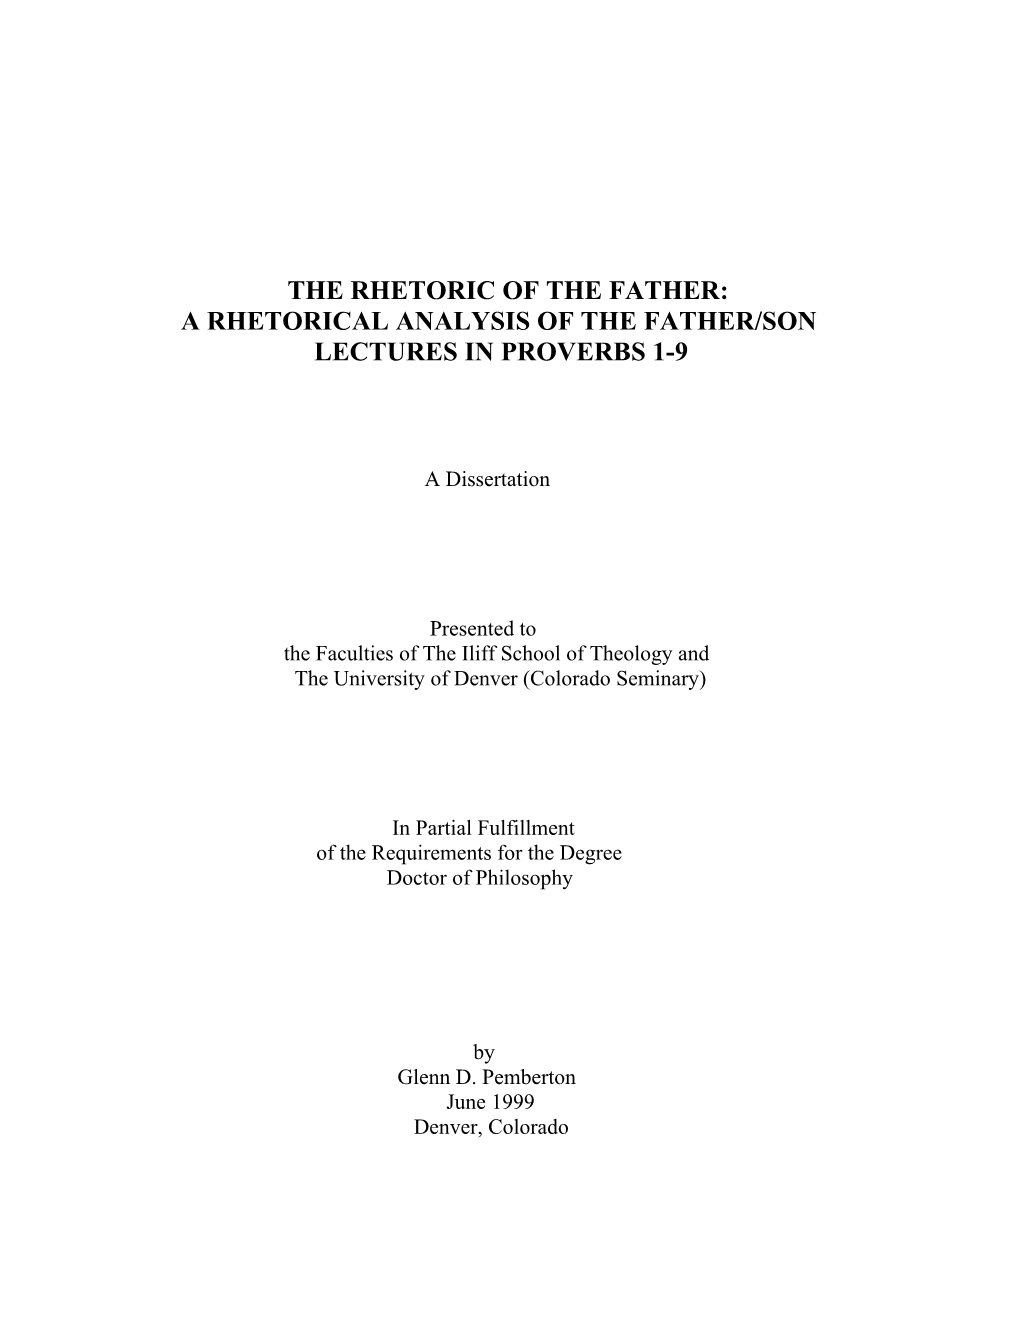 The Rhetoric of the Father: a Rhetorical Analysis of the Father/Son Lectures in Proverbs 1-9